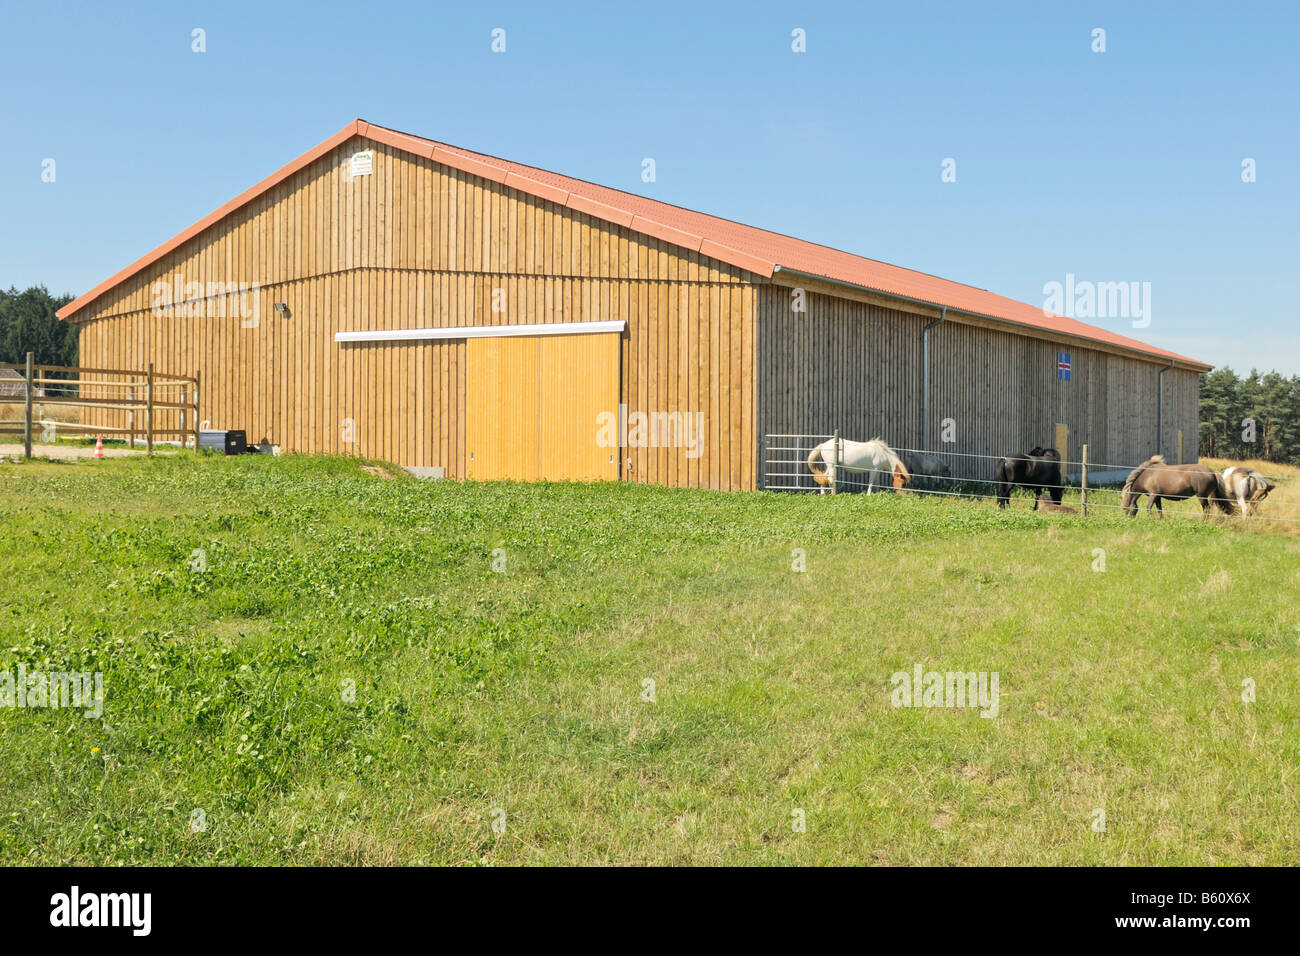 Riding hall and paddock with some ponies in it Stock Photo